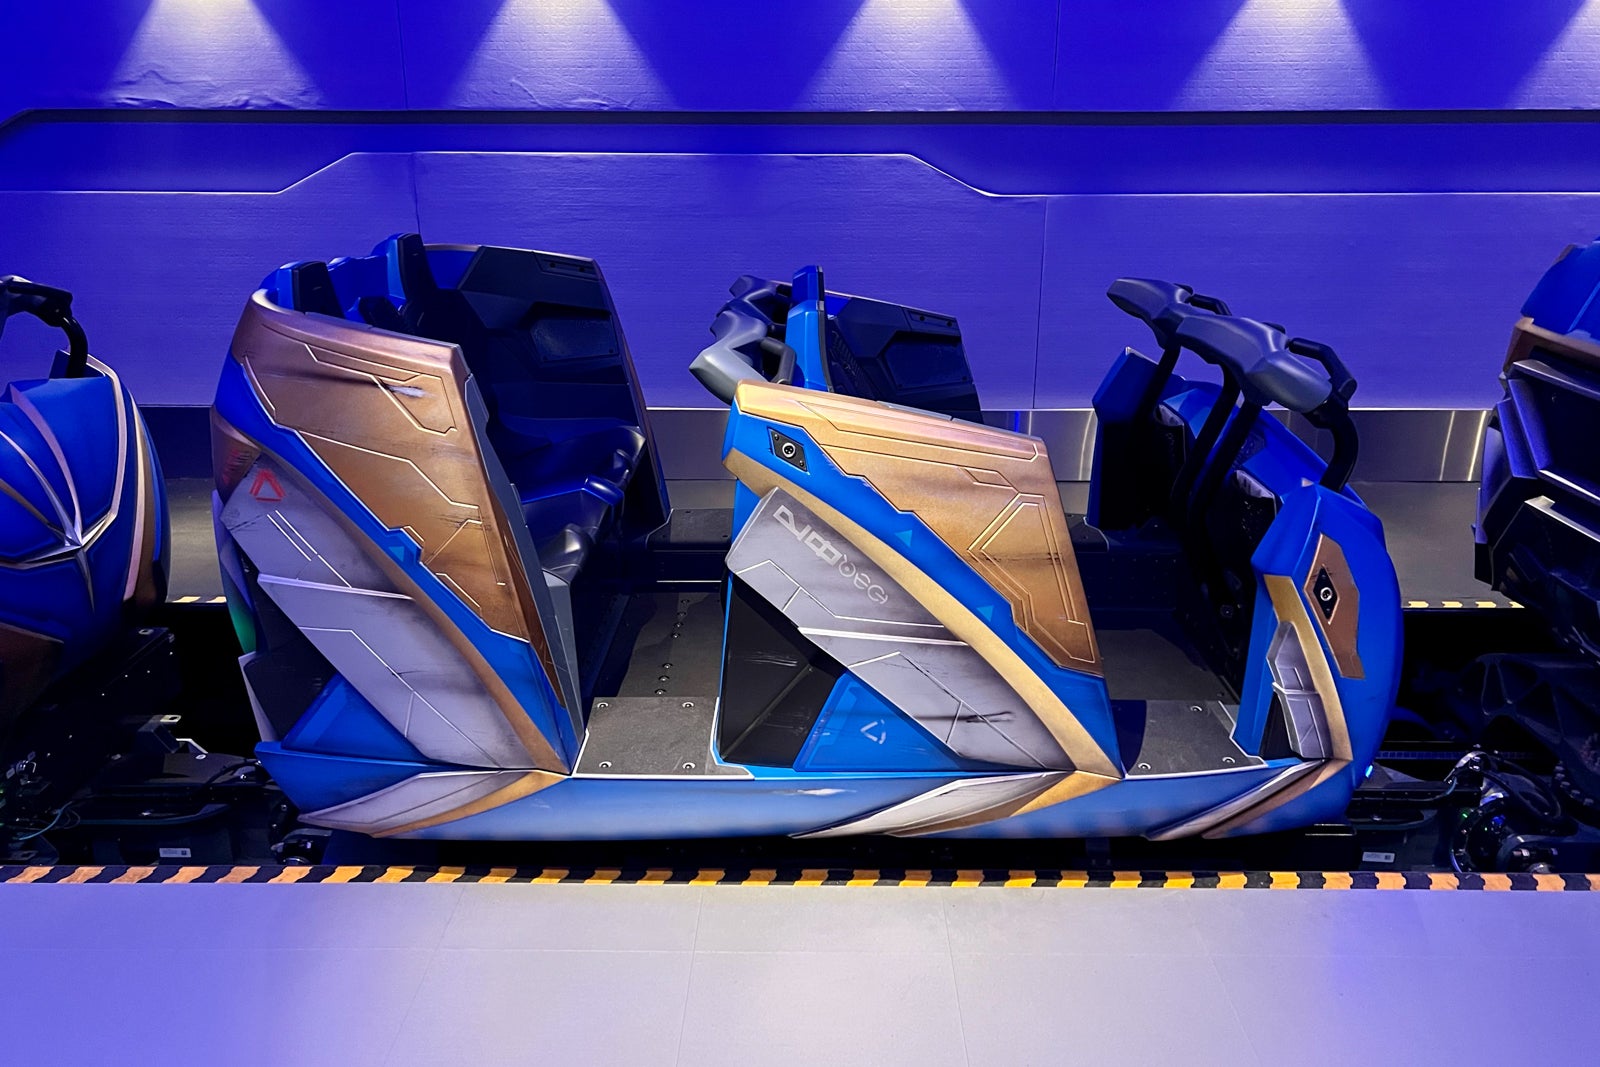 Guardians of the Galaxy Cosmic Rewind Guide How to ride Disney's latest Marvel roller coaster